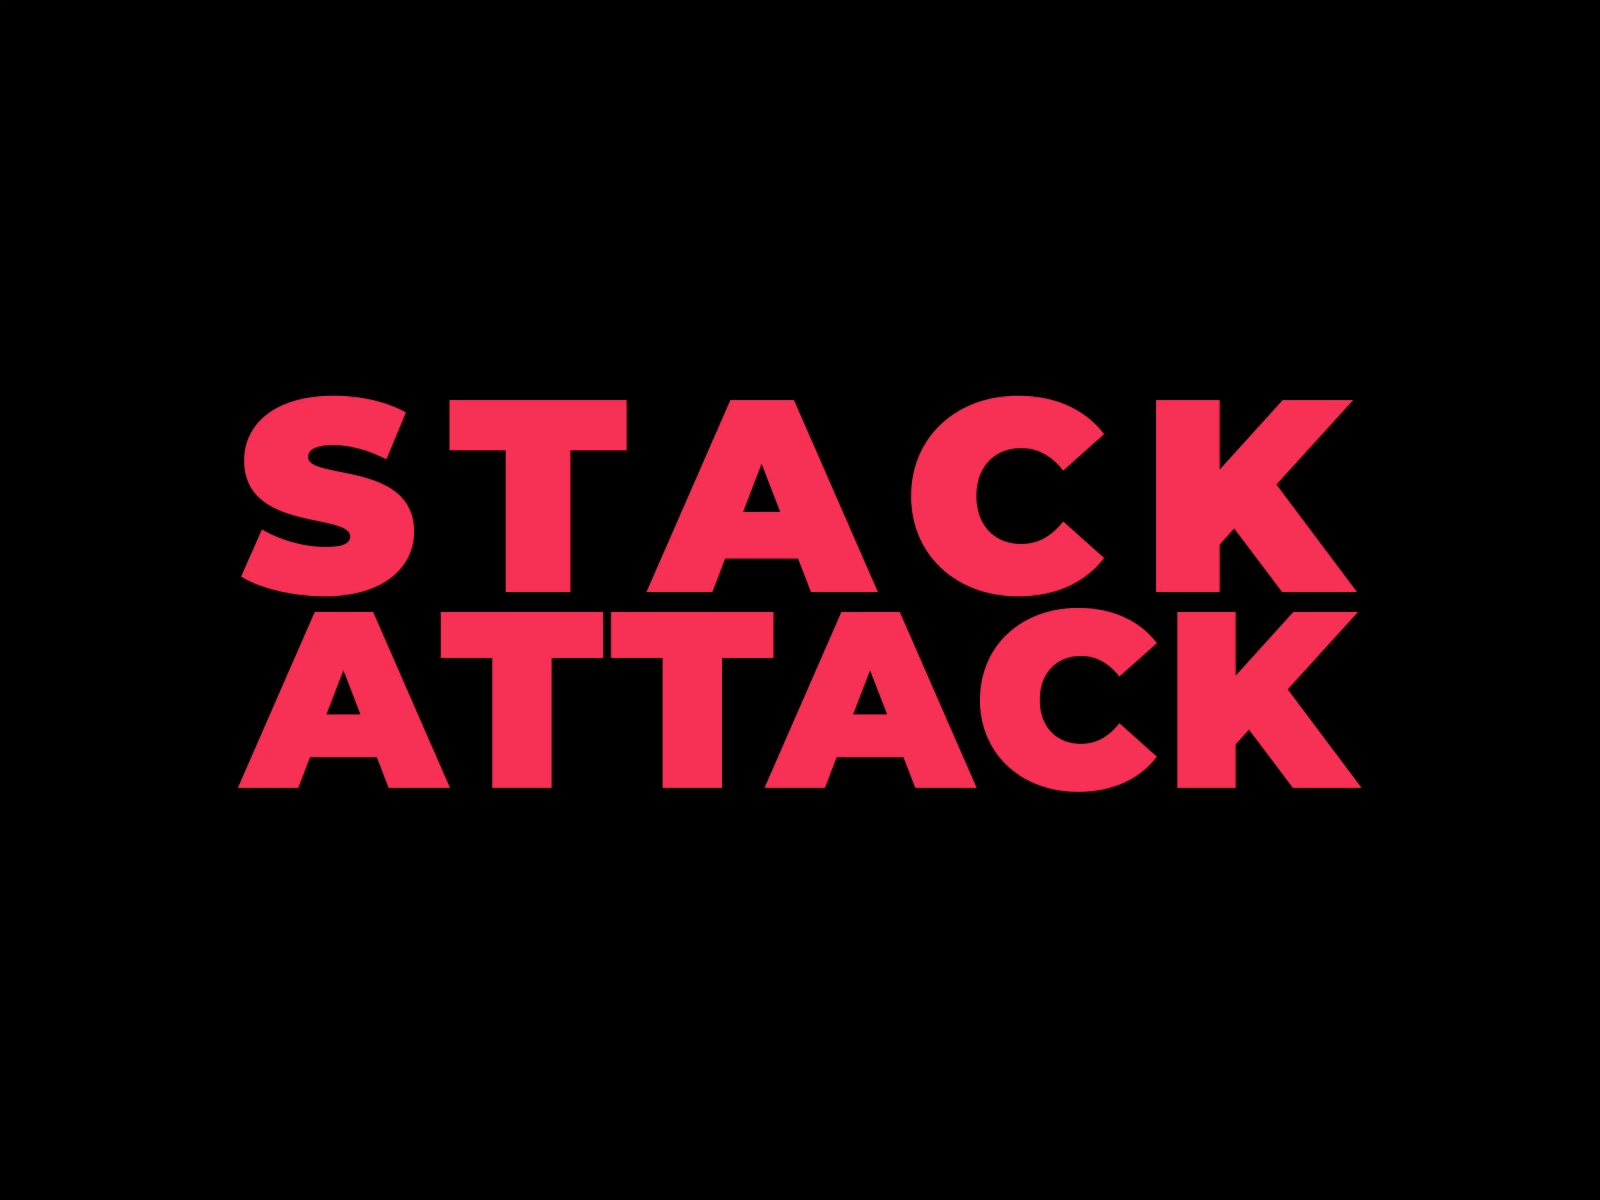 STACK ATTACK